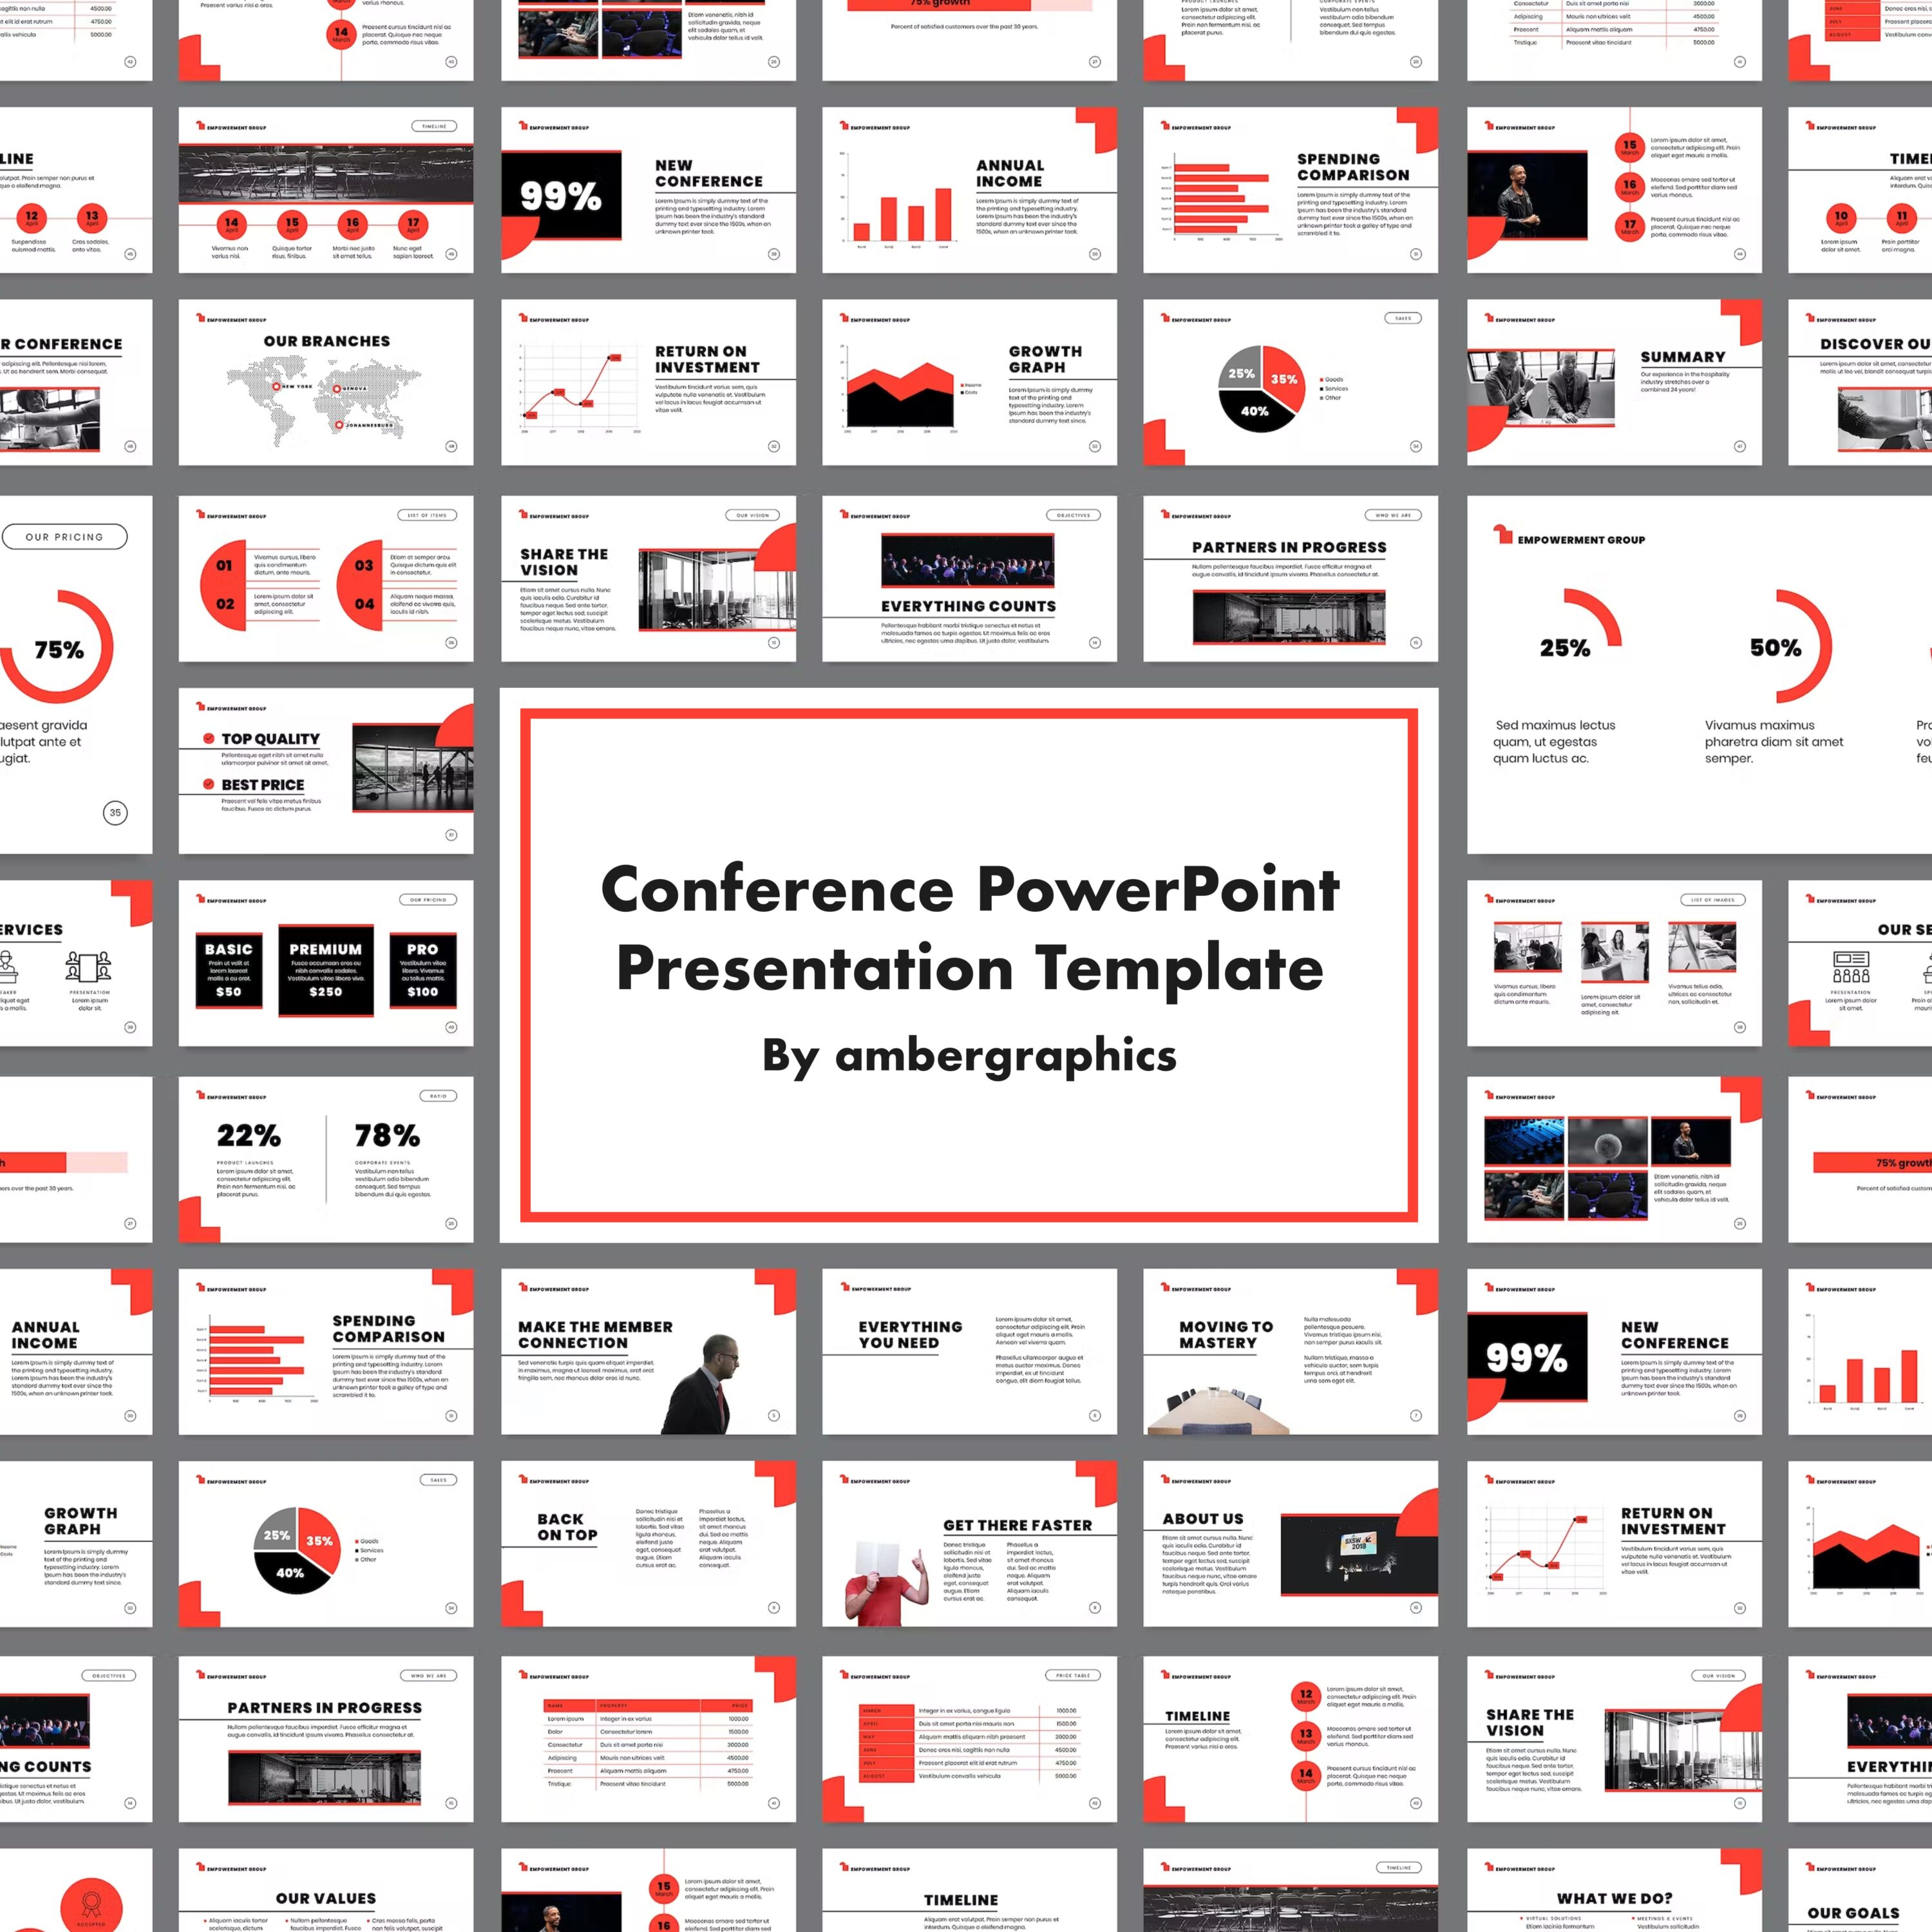 Images with conference powerpoint presentation template.